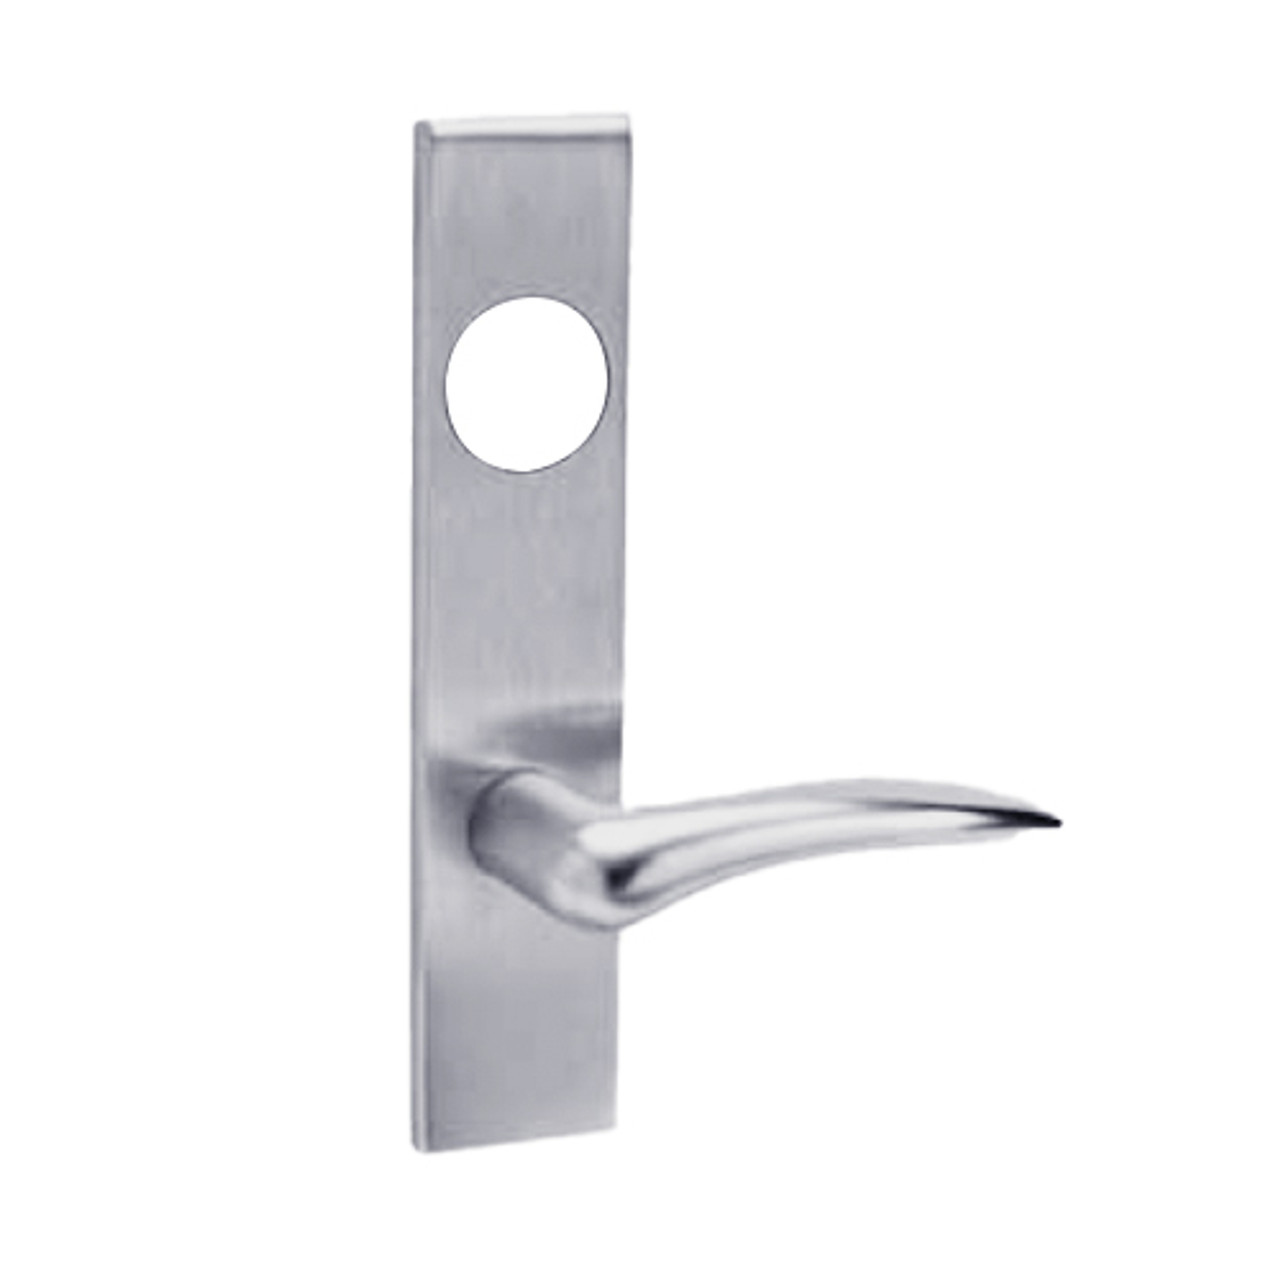 ML2056-DSR-626-LC-LH Corbin Russwin ML2000 Series Mortise Classroom Locksets with Dirke Lever in Satin Chrome